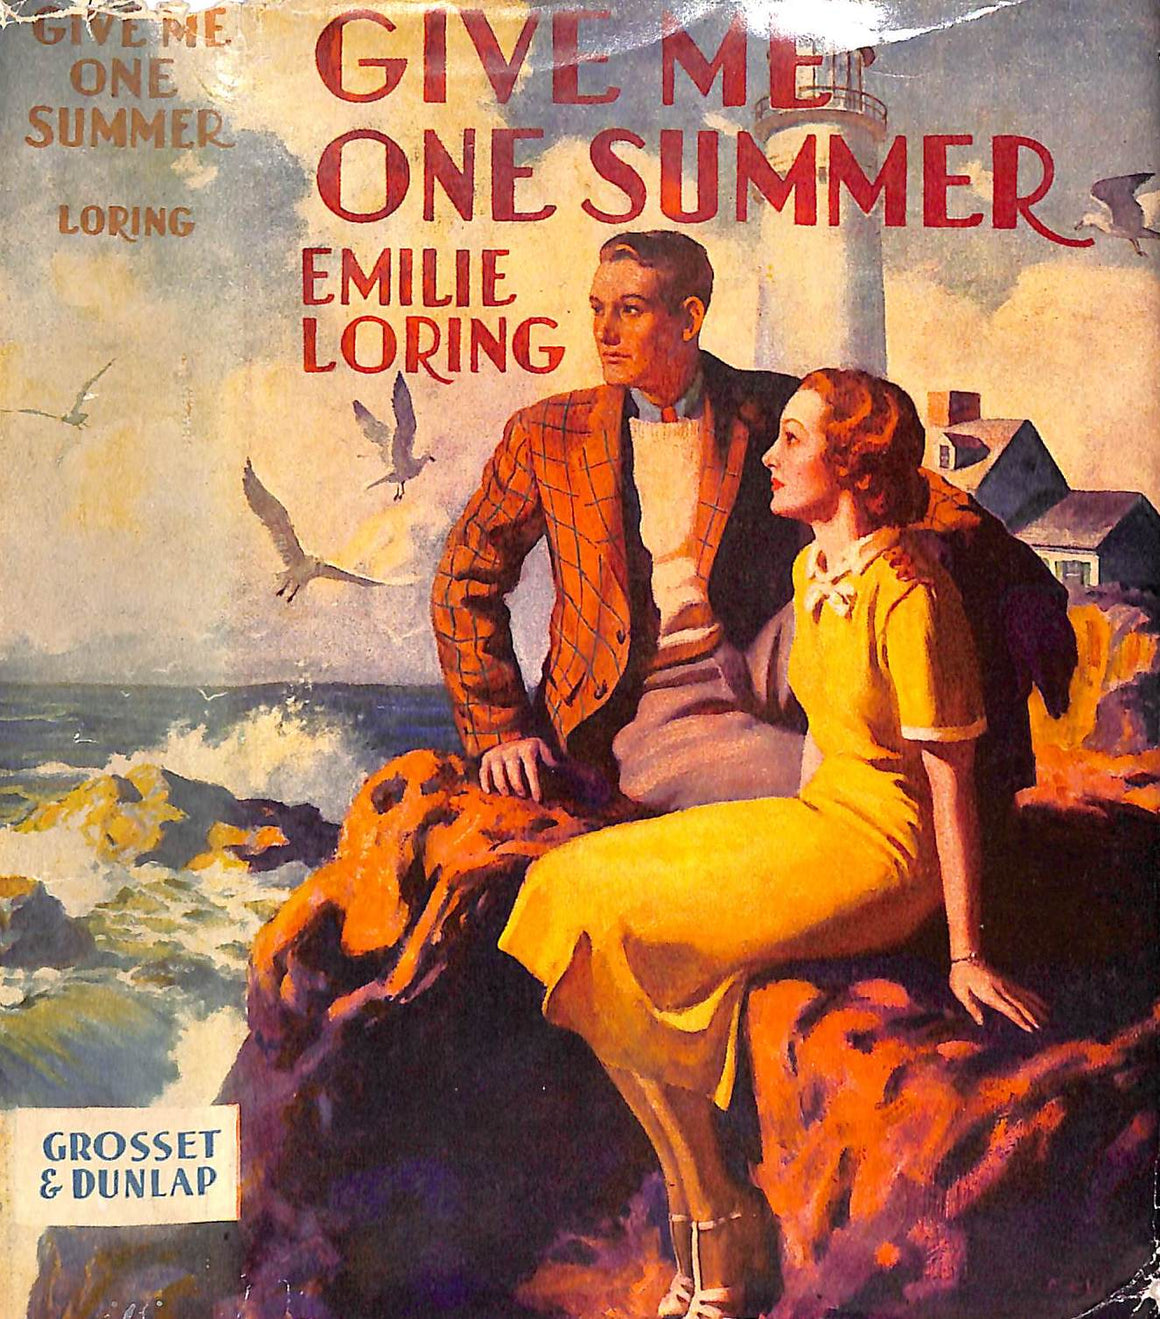 "Give Me One Summer" 1936 LORING, Emilie